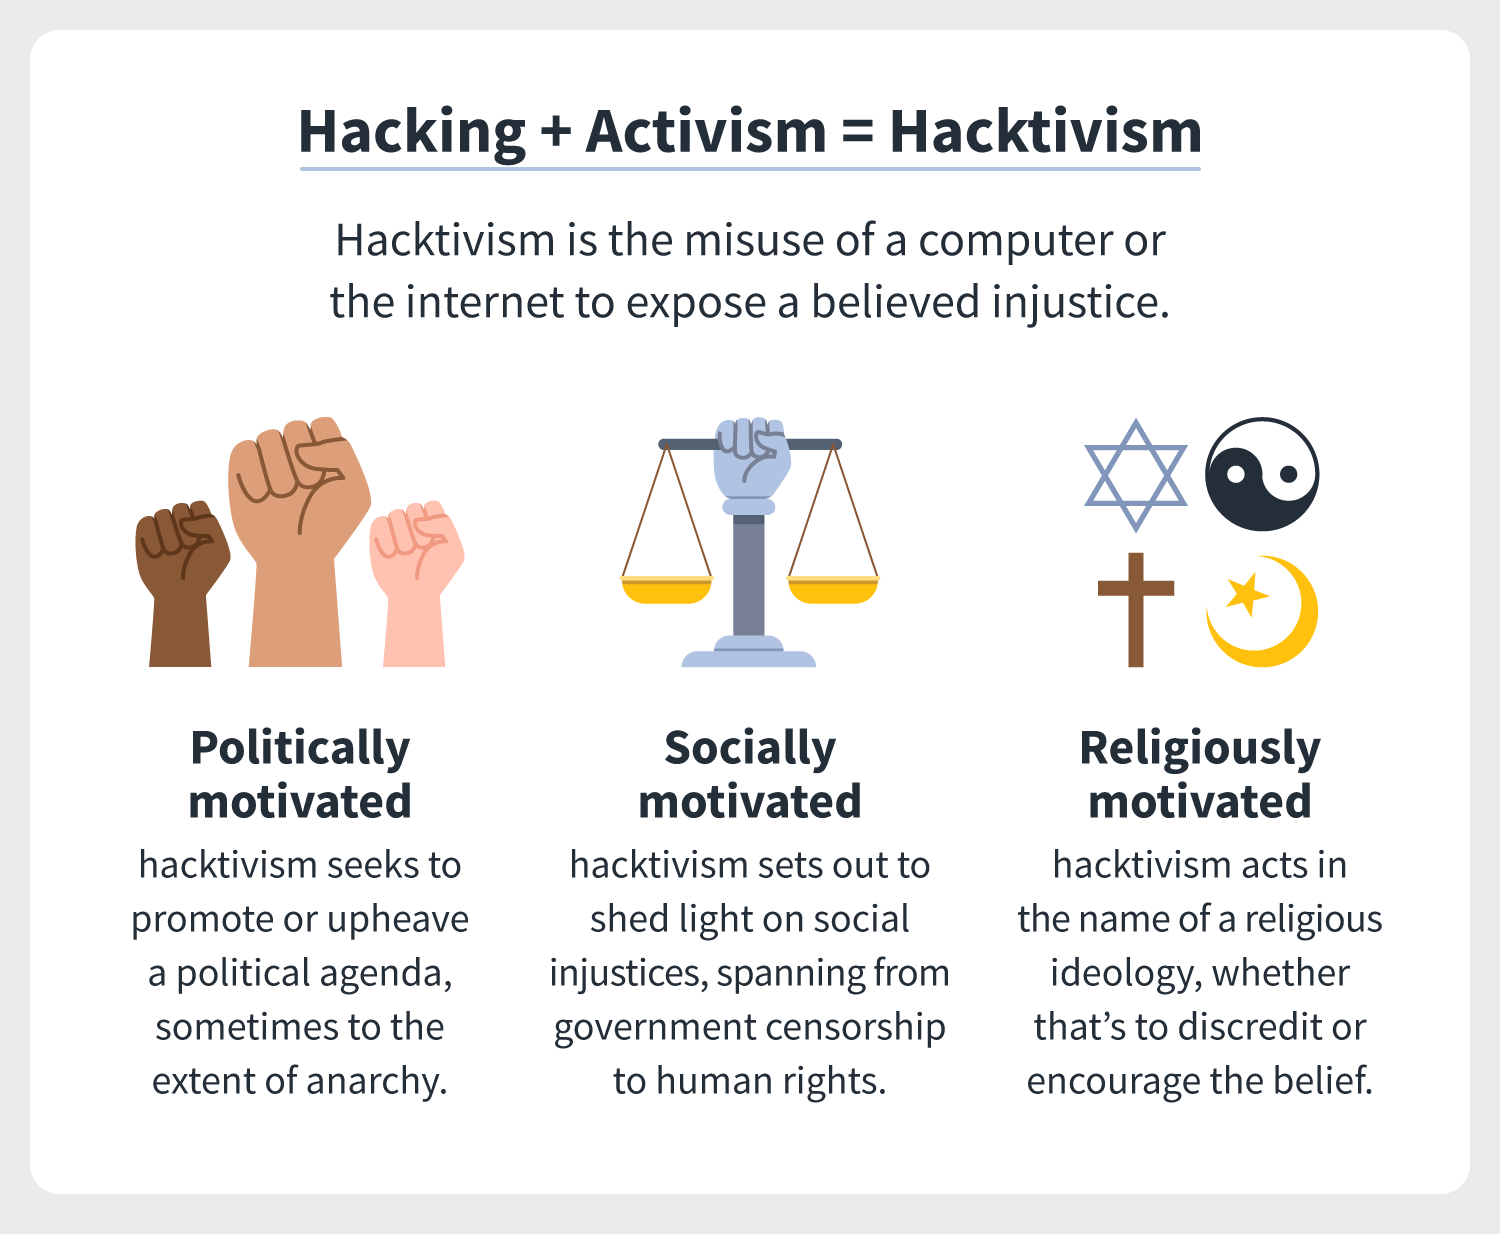 an overview of the term hacktivism and the political, social, and religious motivations for it